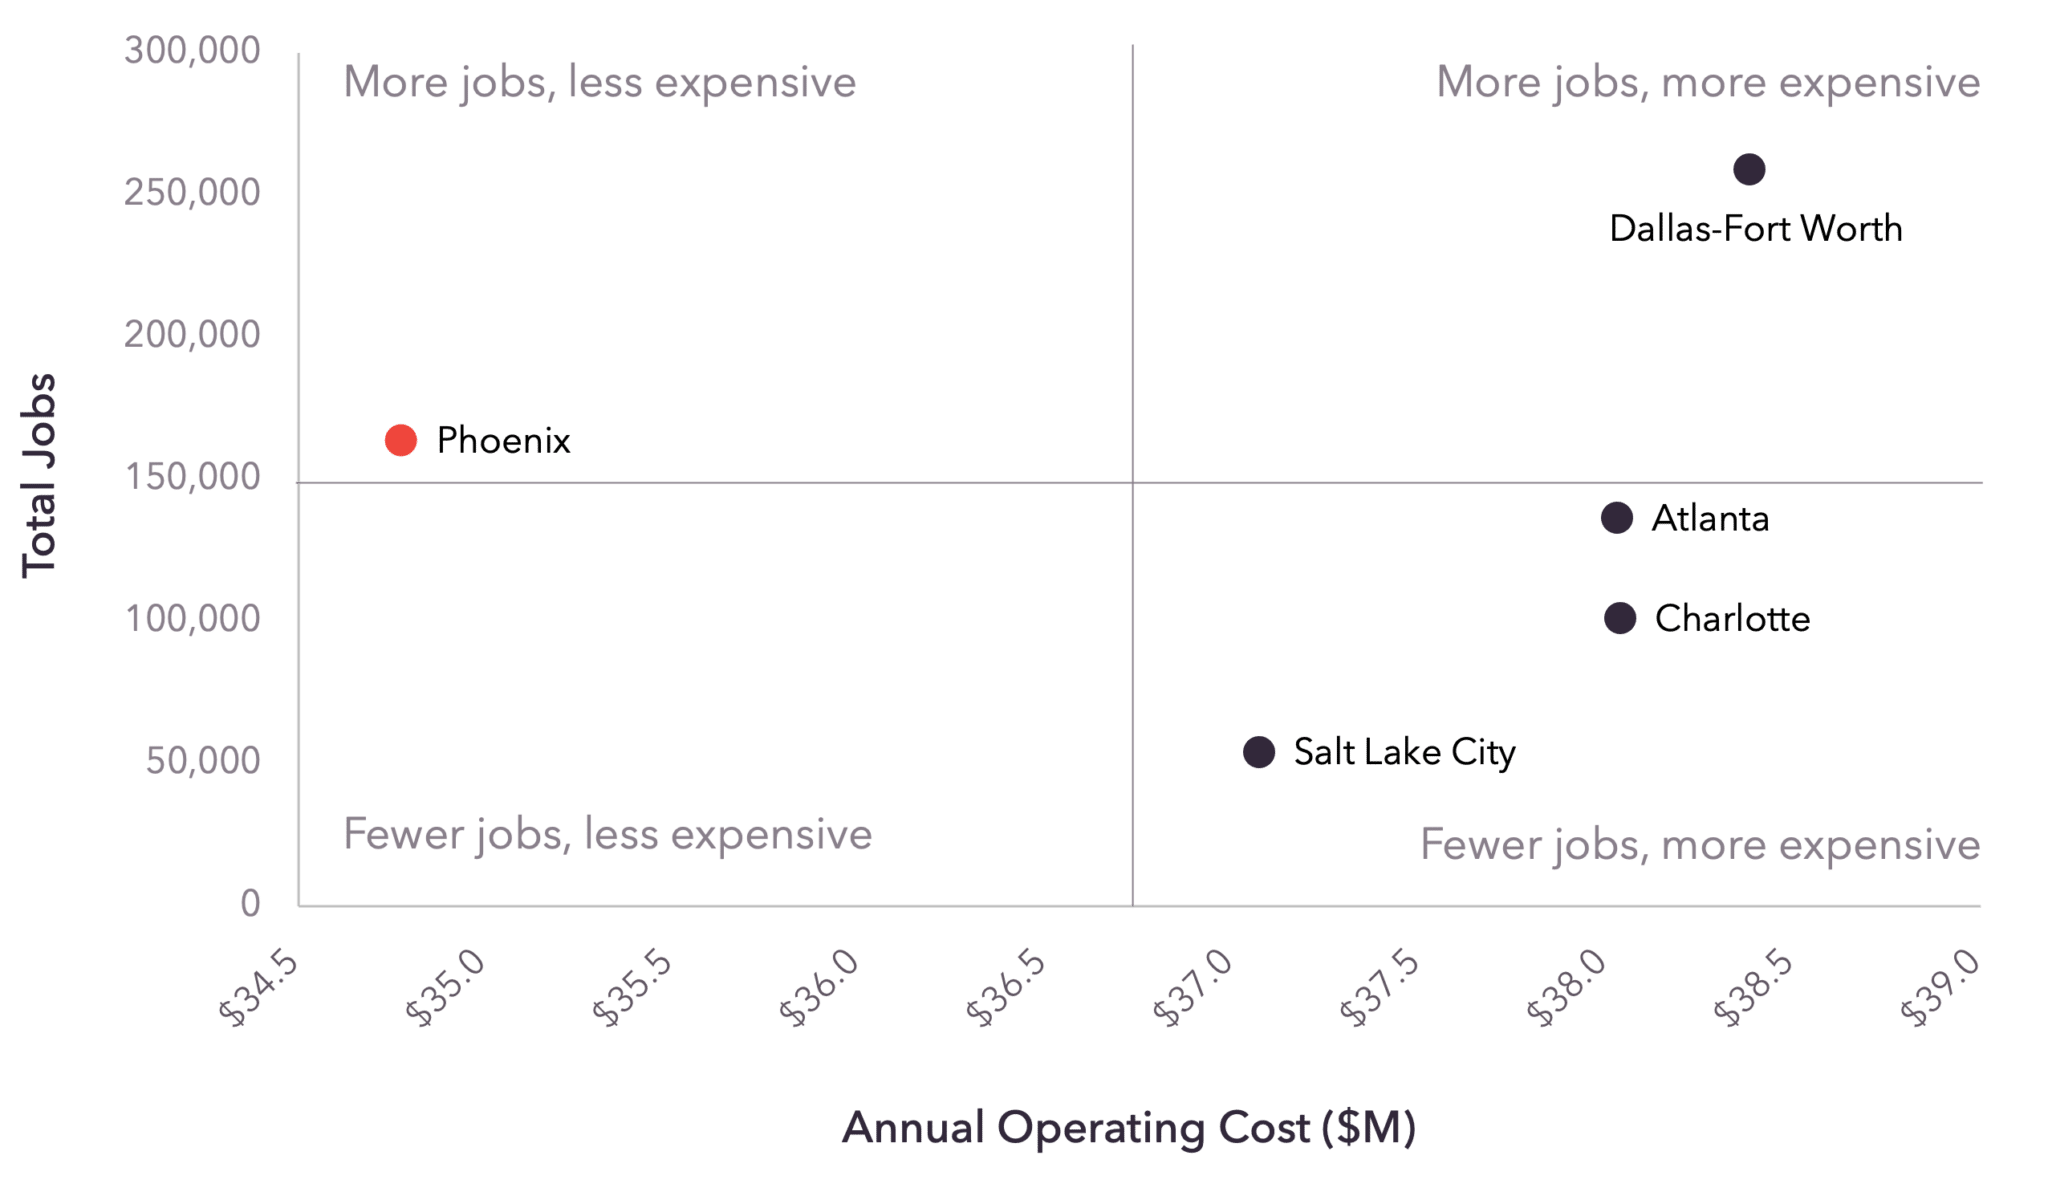 A quadrant graph comparing jobs to operating costs for four regions. Greater Phoenix is less expensive, more jobs quadrant while Salt Lake City, Charlotte and Atlanta are in the fewer jobs, more expensive quadrant and Dallas-Fort Worth is in the more jobs, more expensive section.